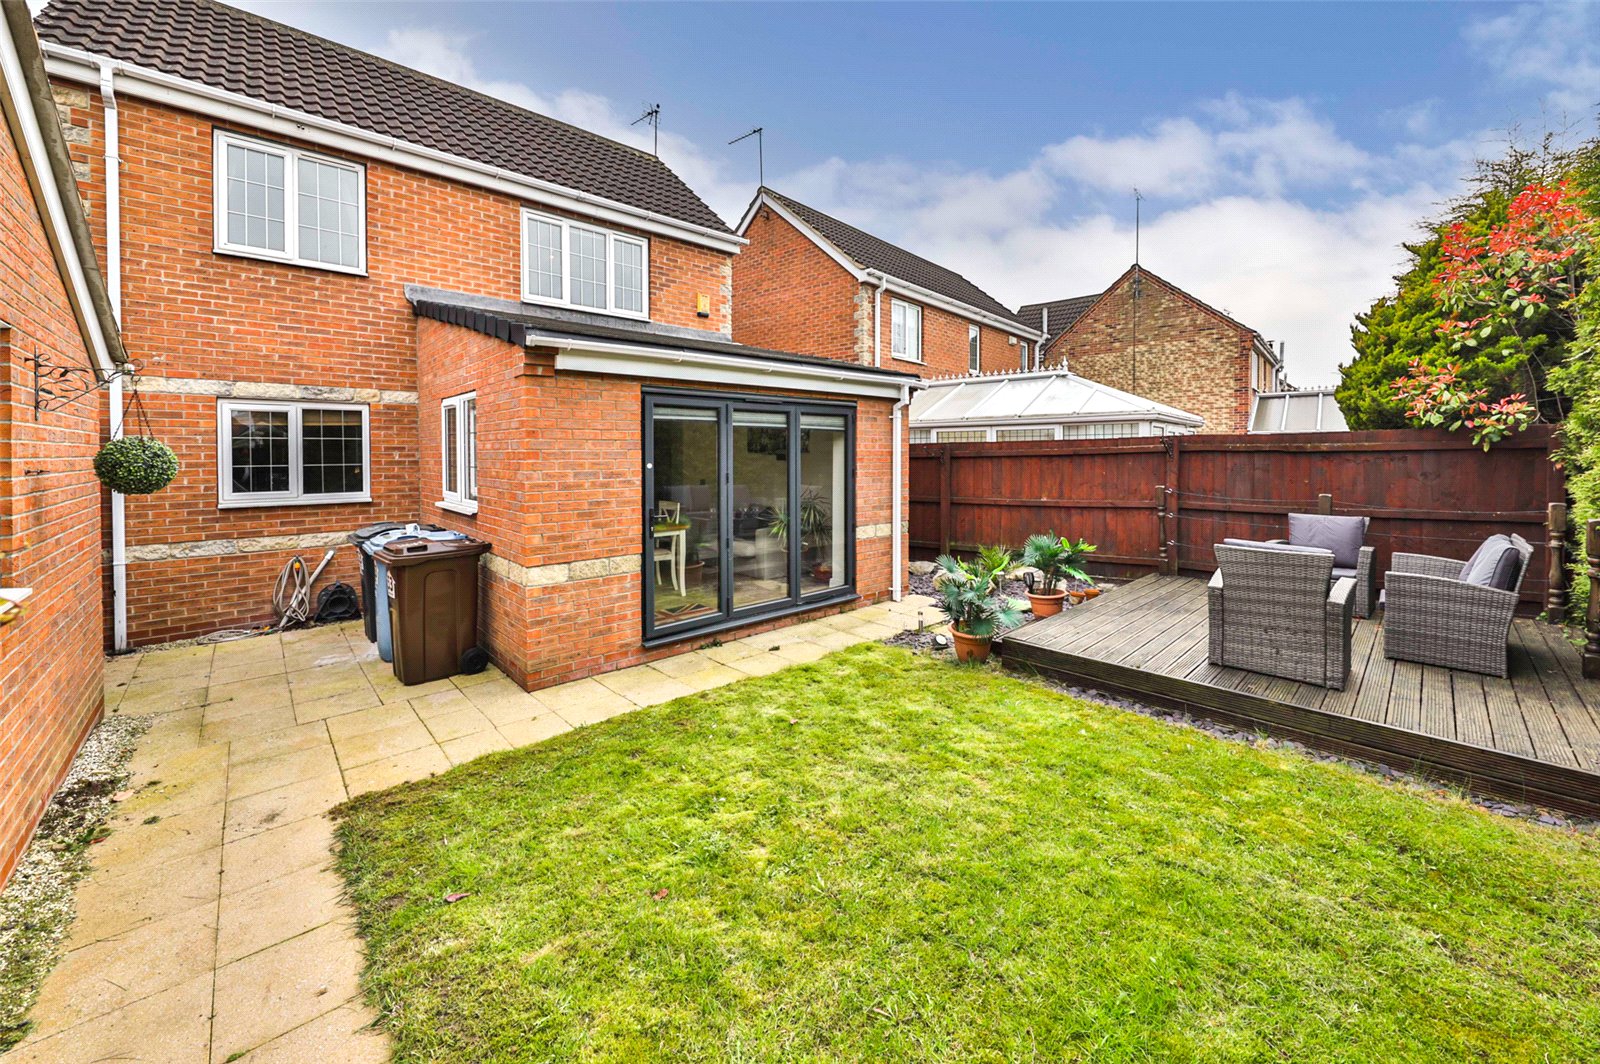 3 bed house for sale in Santolina Way, Hull, HU4 